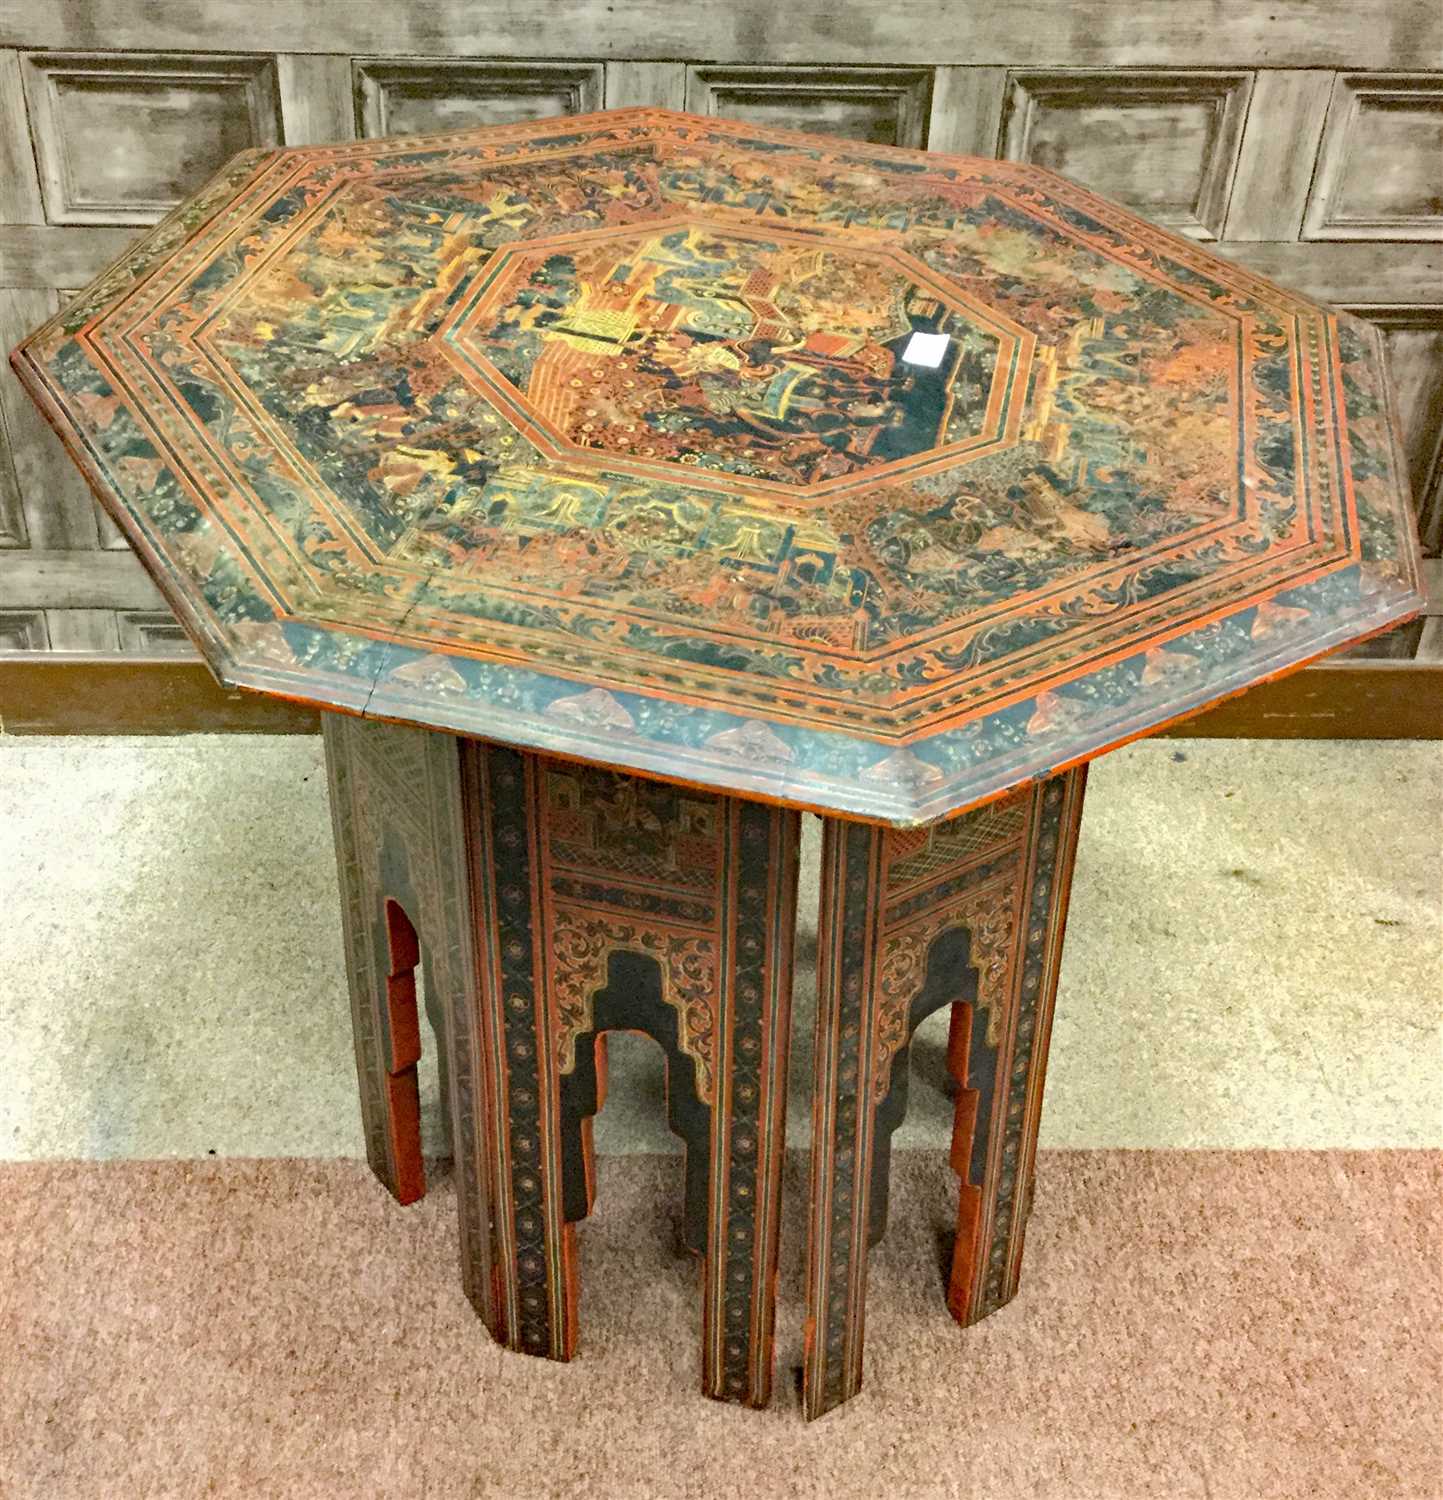 Lot 1063 - A BURMESE PAINTED LACQUERED OCTAGONAL TABLE